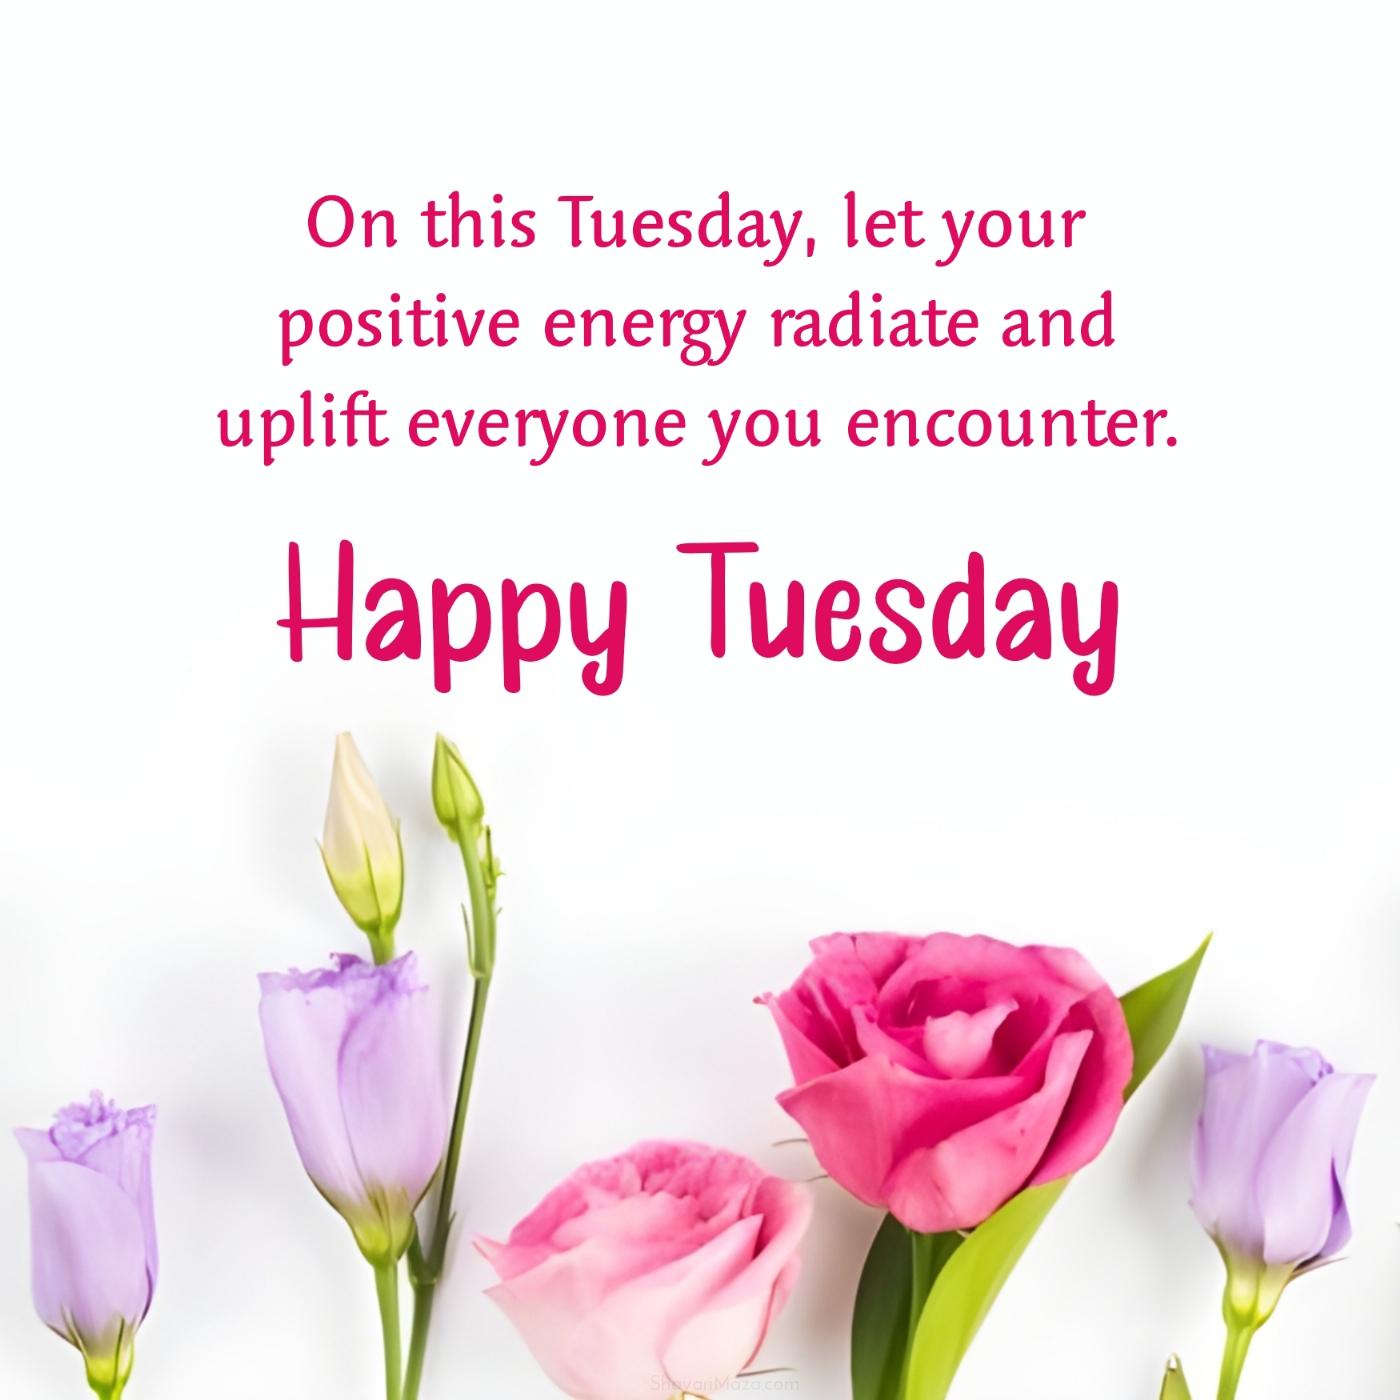 On this Tuesday let your positive energy radiate and uplift everyone